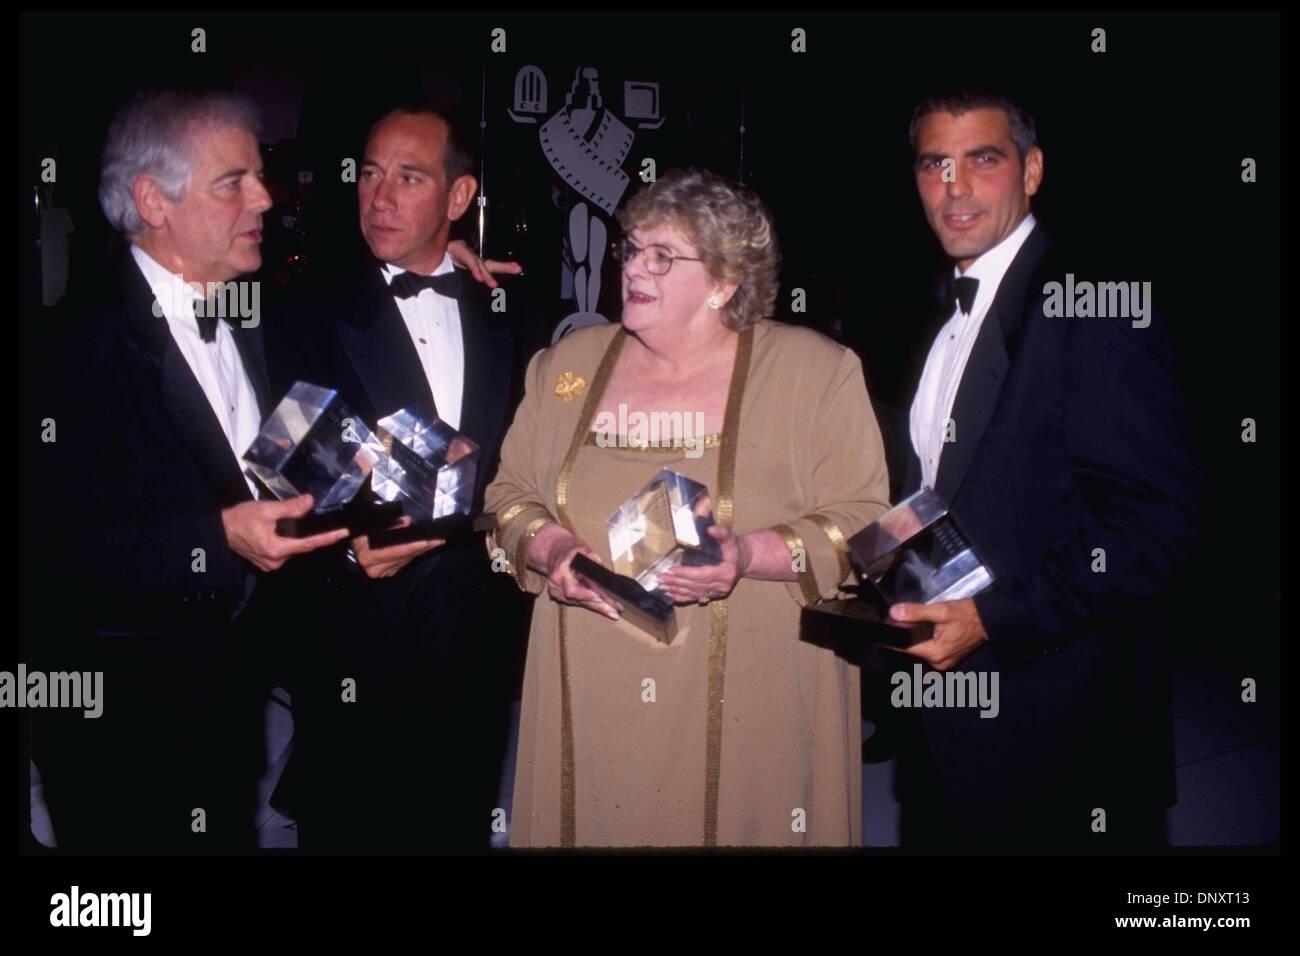 October 5, 1996; Hollywood, CA, USA; NICK CLOONEY, ROSEMARY CLOONEY, GEORGE CLOONEY and MIGUEL FERRER attend the opening Hollywood Entertainment Museum on October 5, 1996. Mandatory Credit: Kathy Hutchins/ZUMA Press. (©) Kathy Hutchins Stock Photo